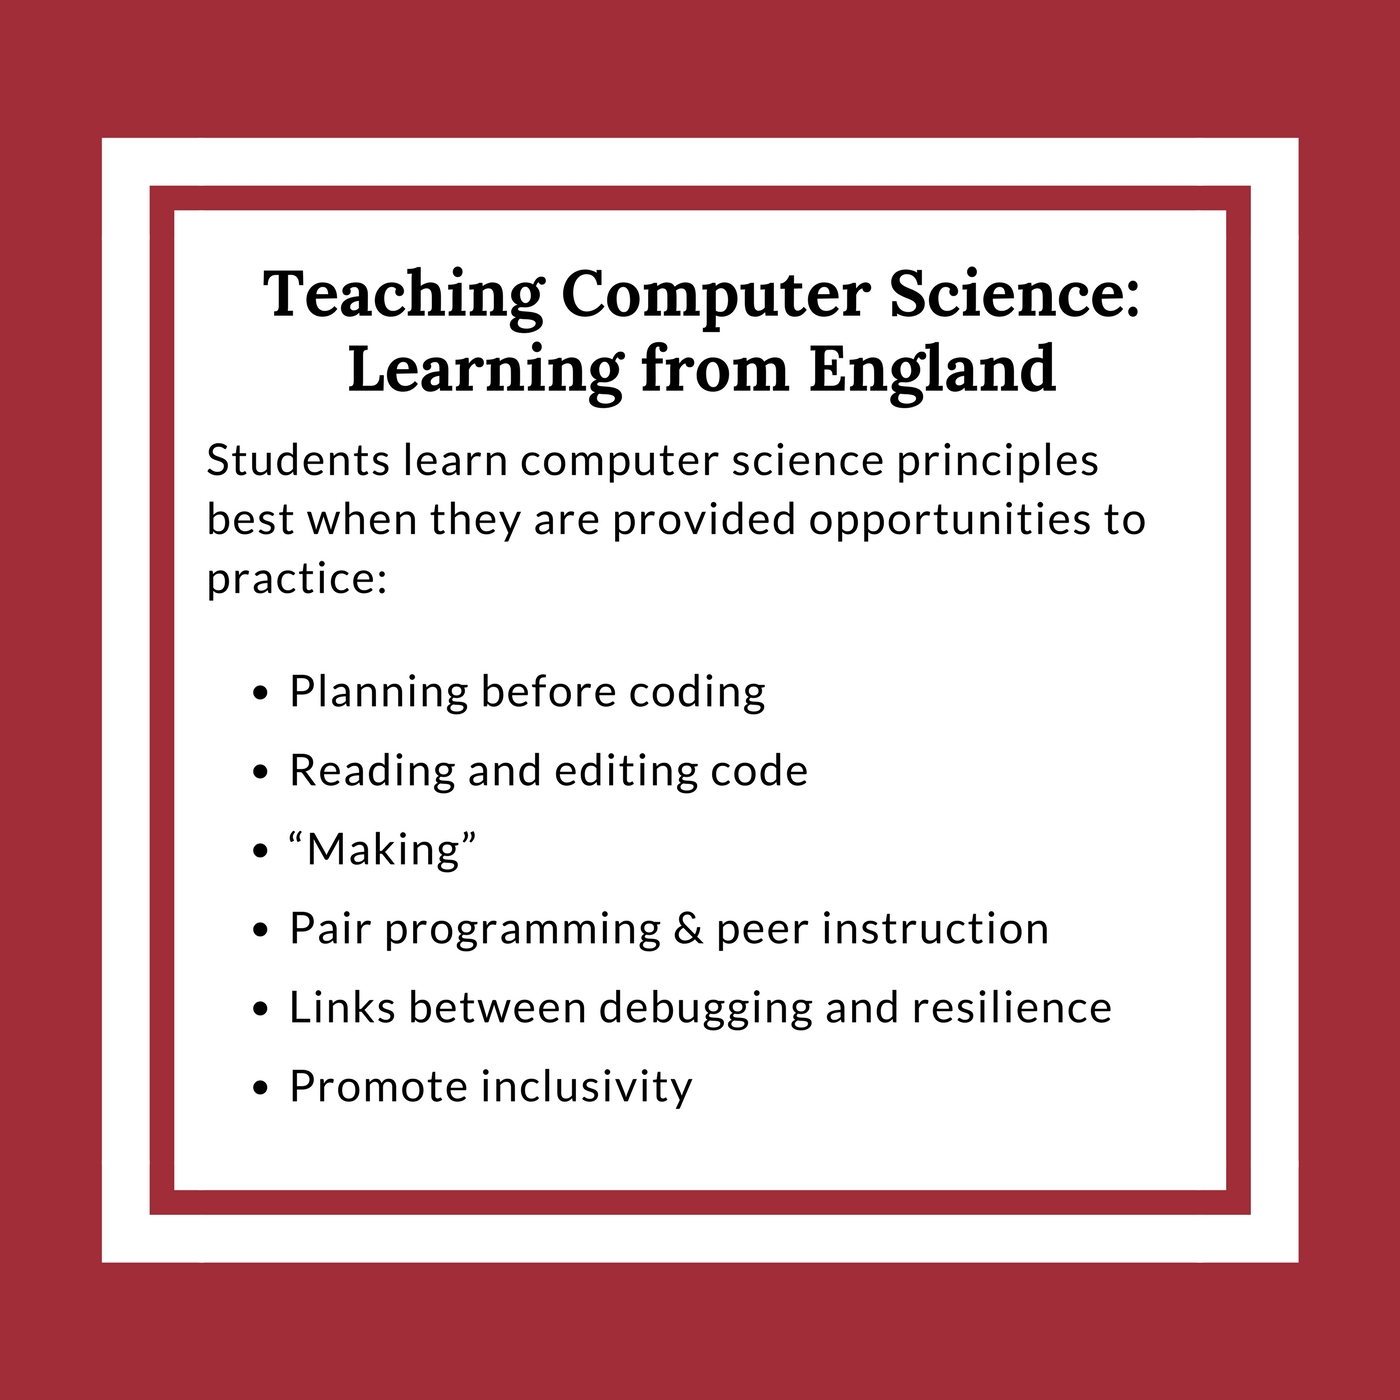 The principles of computer science are just like any other subject - they require practice.